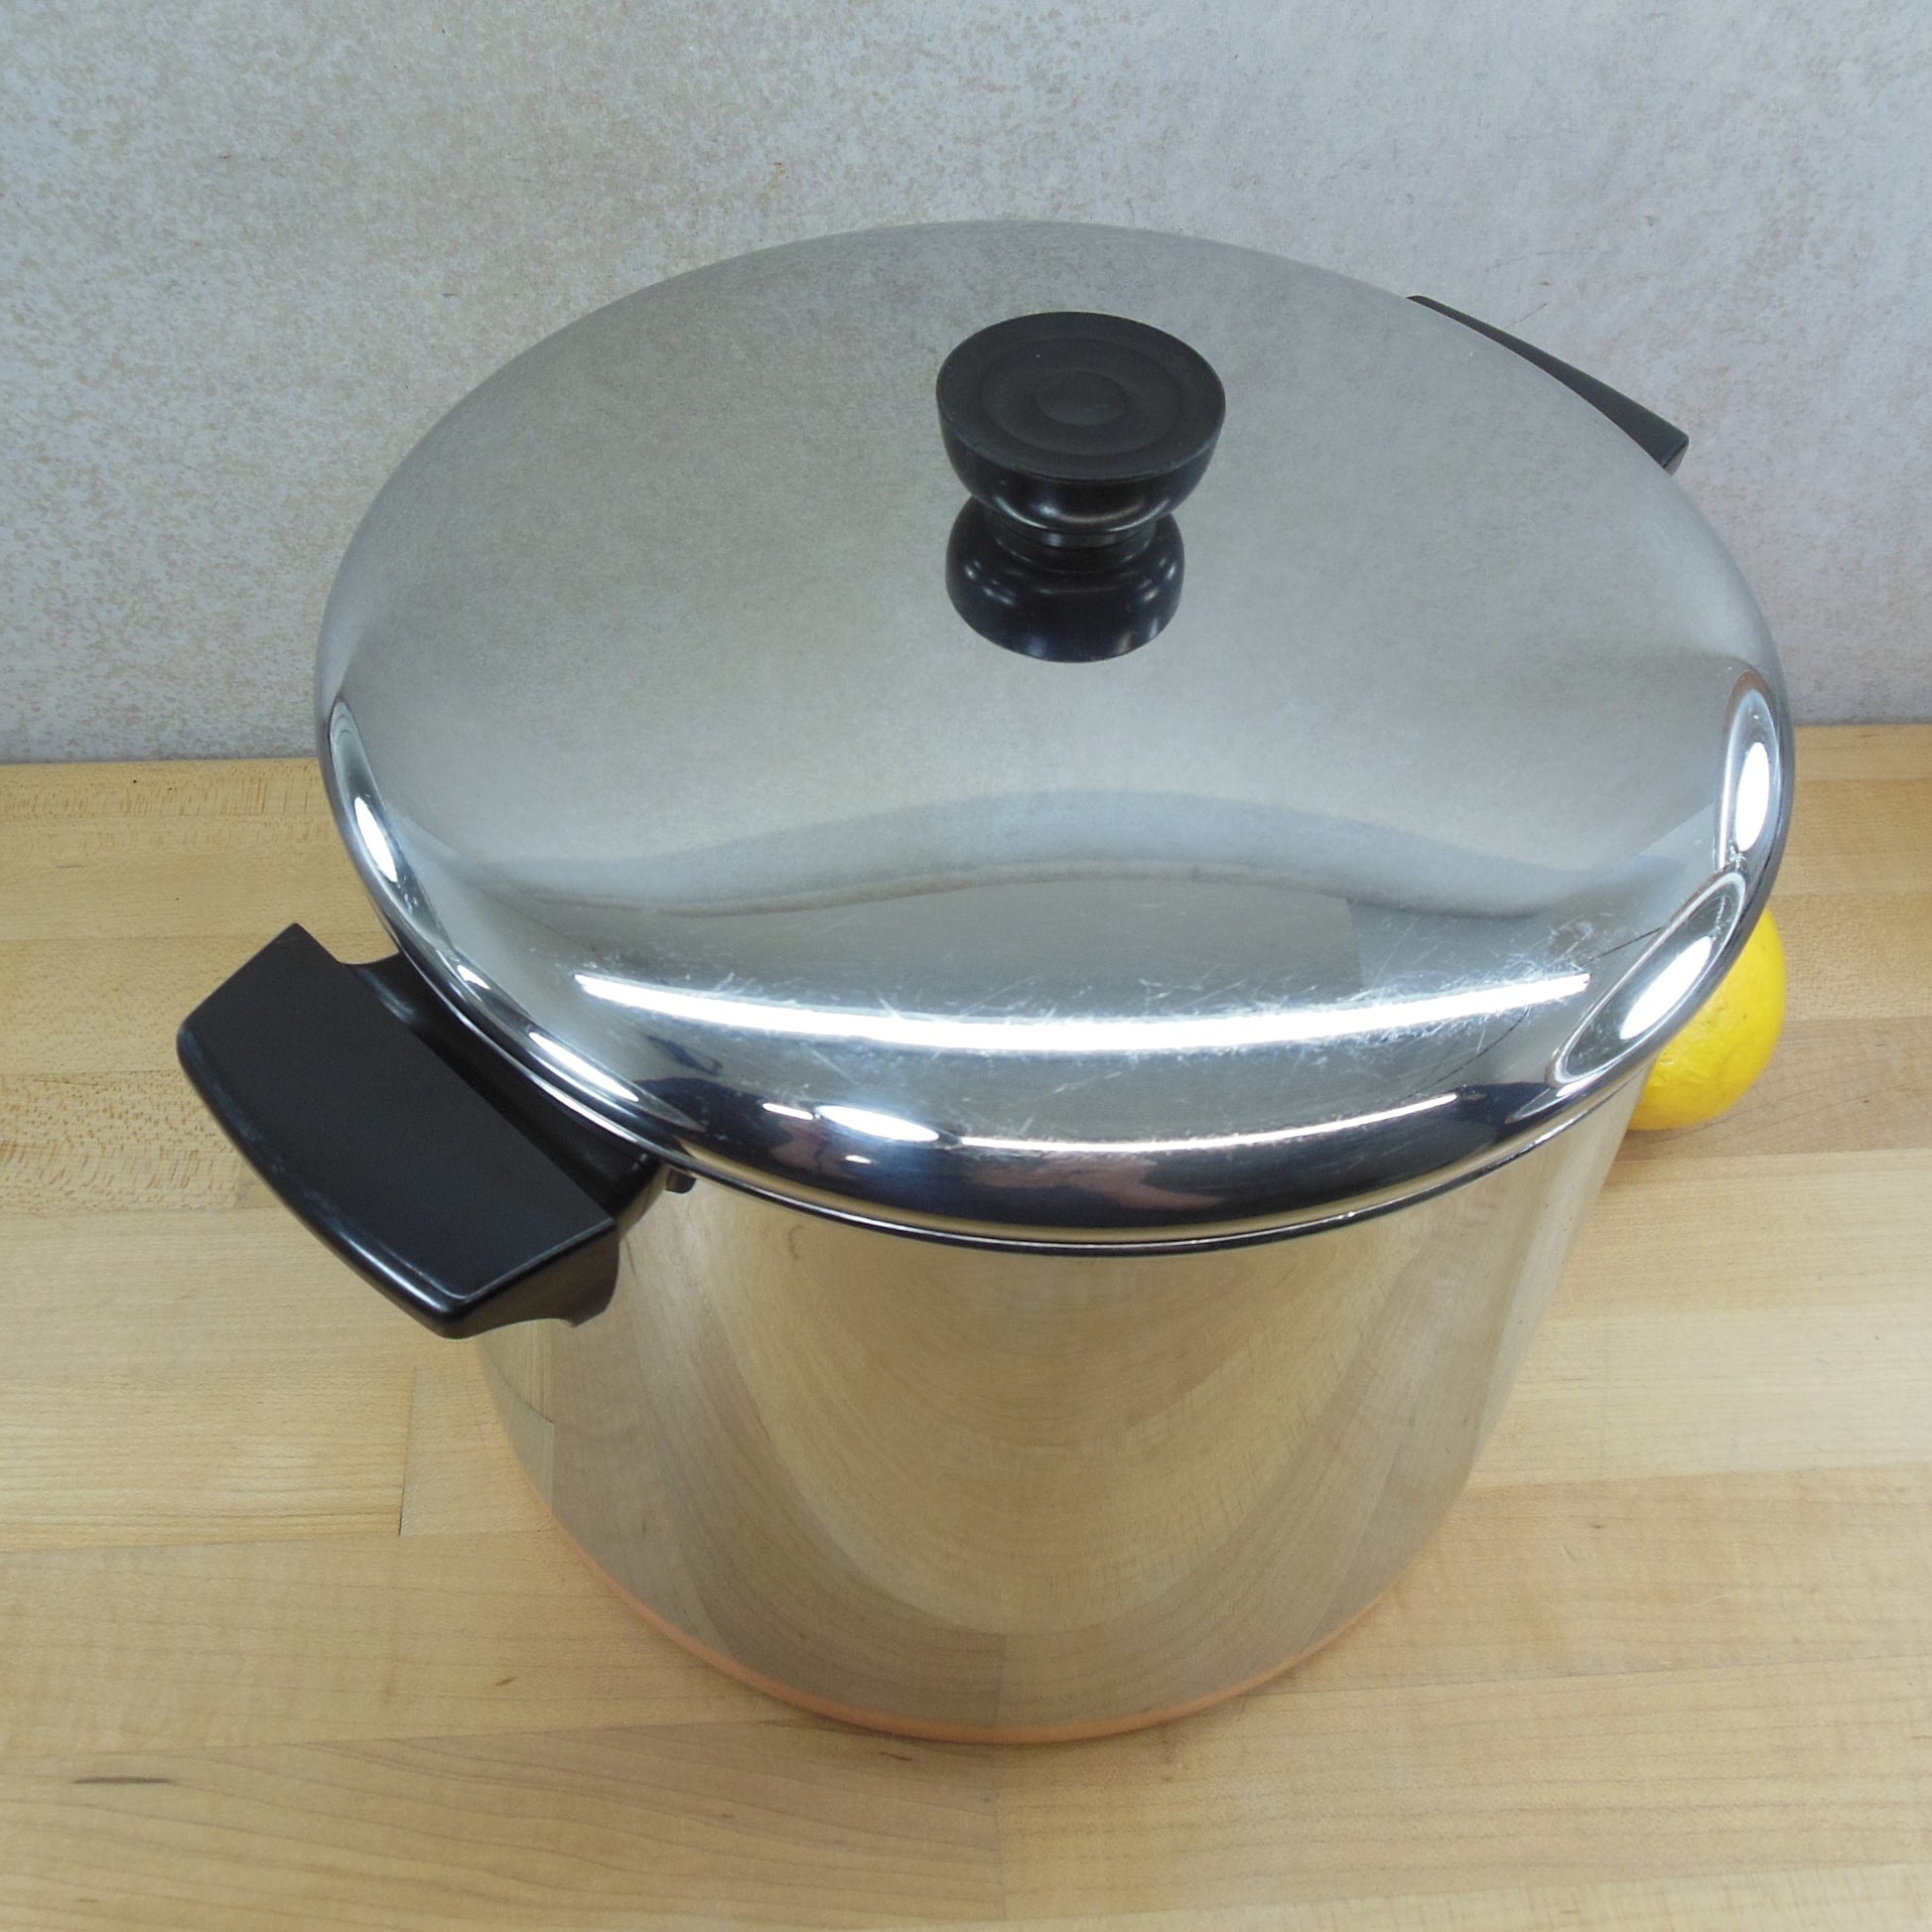 Revere Ware 1991 USA 8 Quart Tall Stock Pot Stainless Copper Clad 1428 Vintage